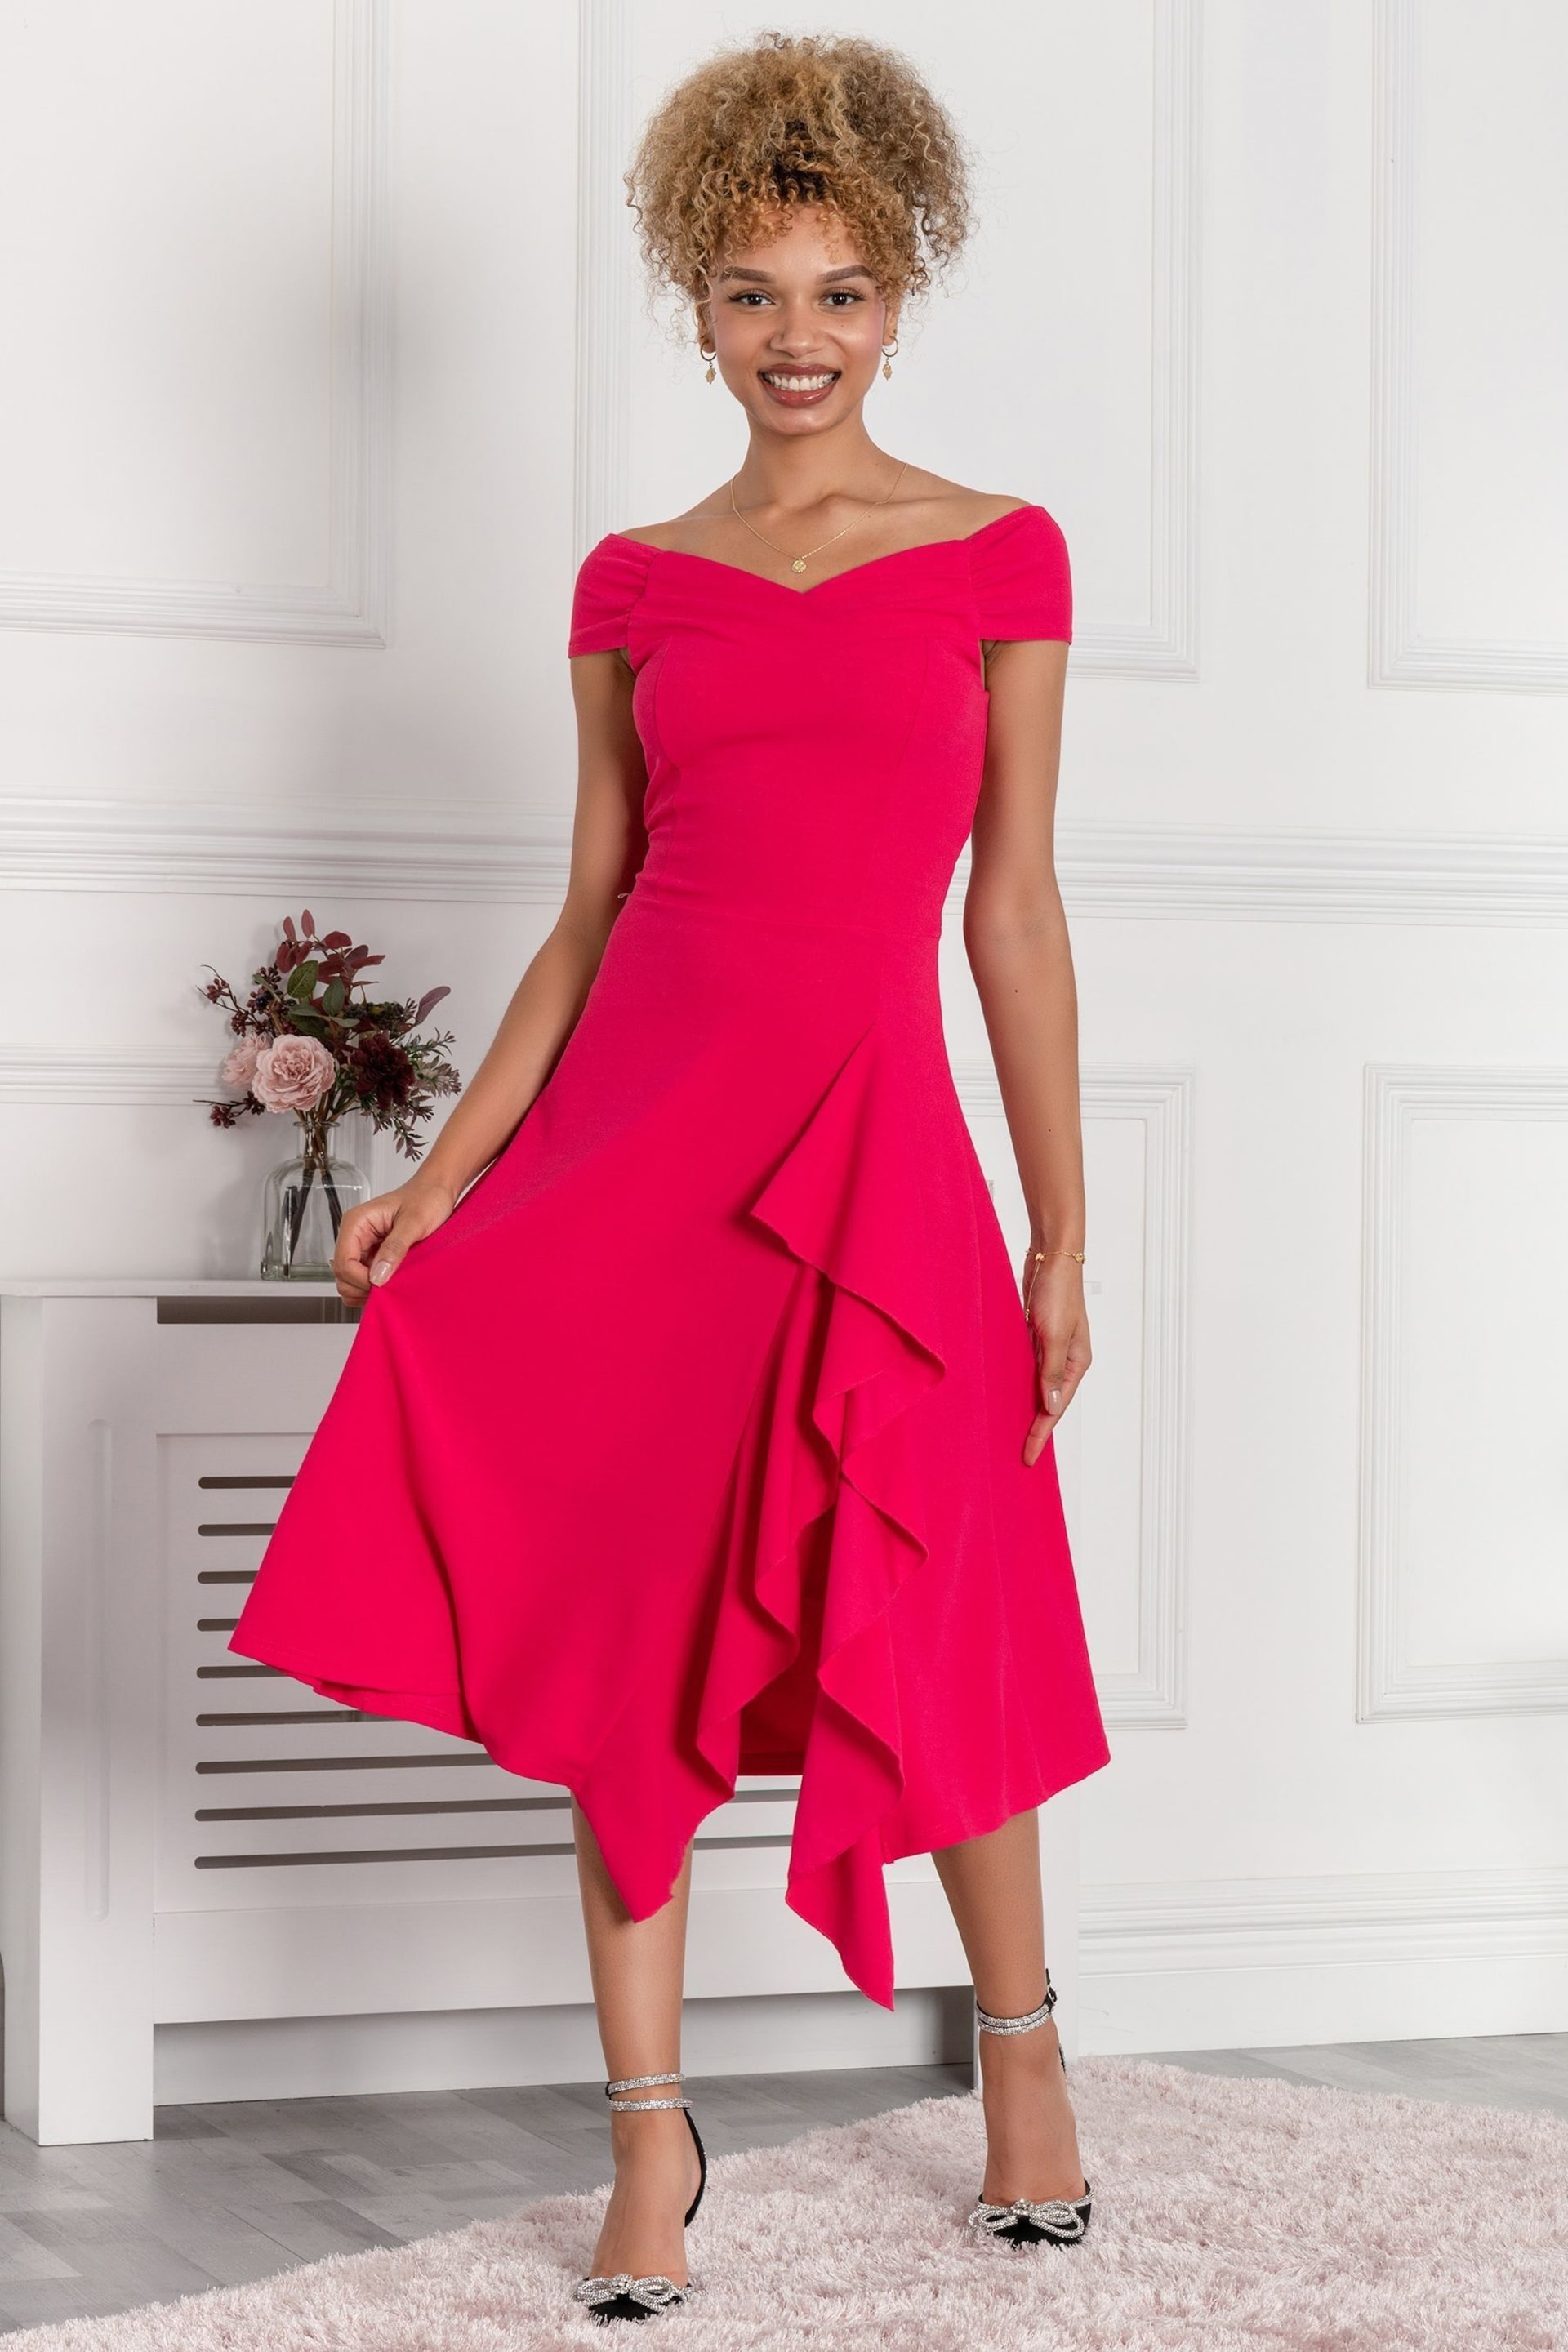 Jolie Moi Pink Desiree Frill Fit & Flare Dress - Image 5 of 5